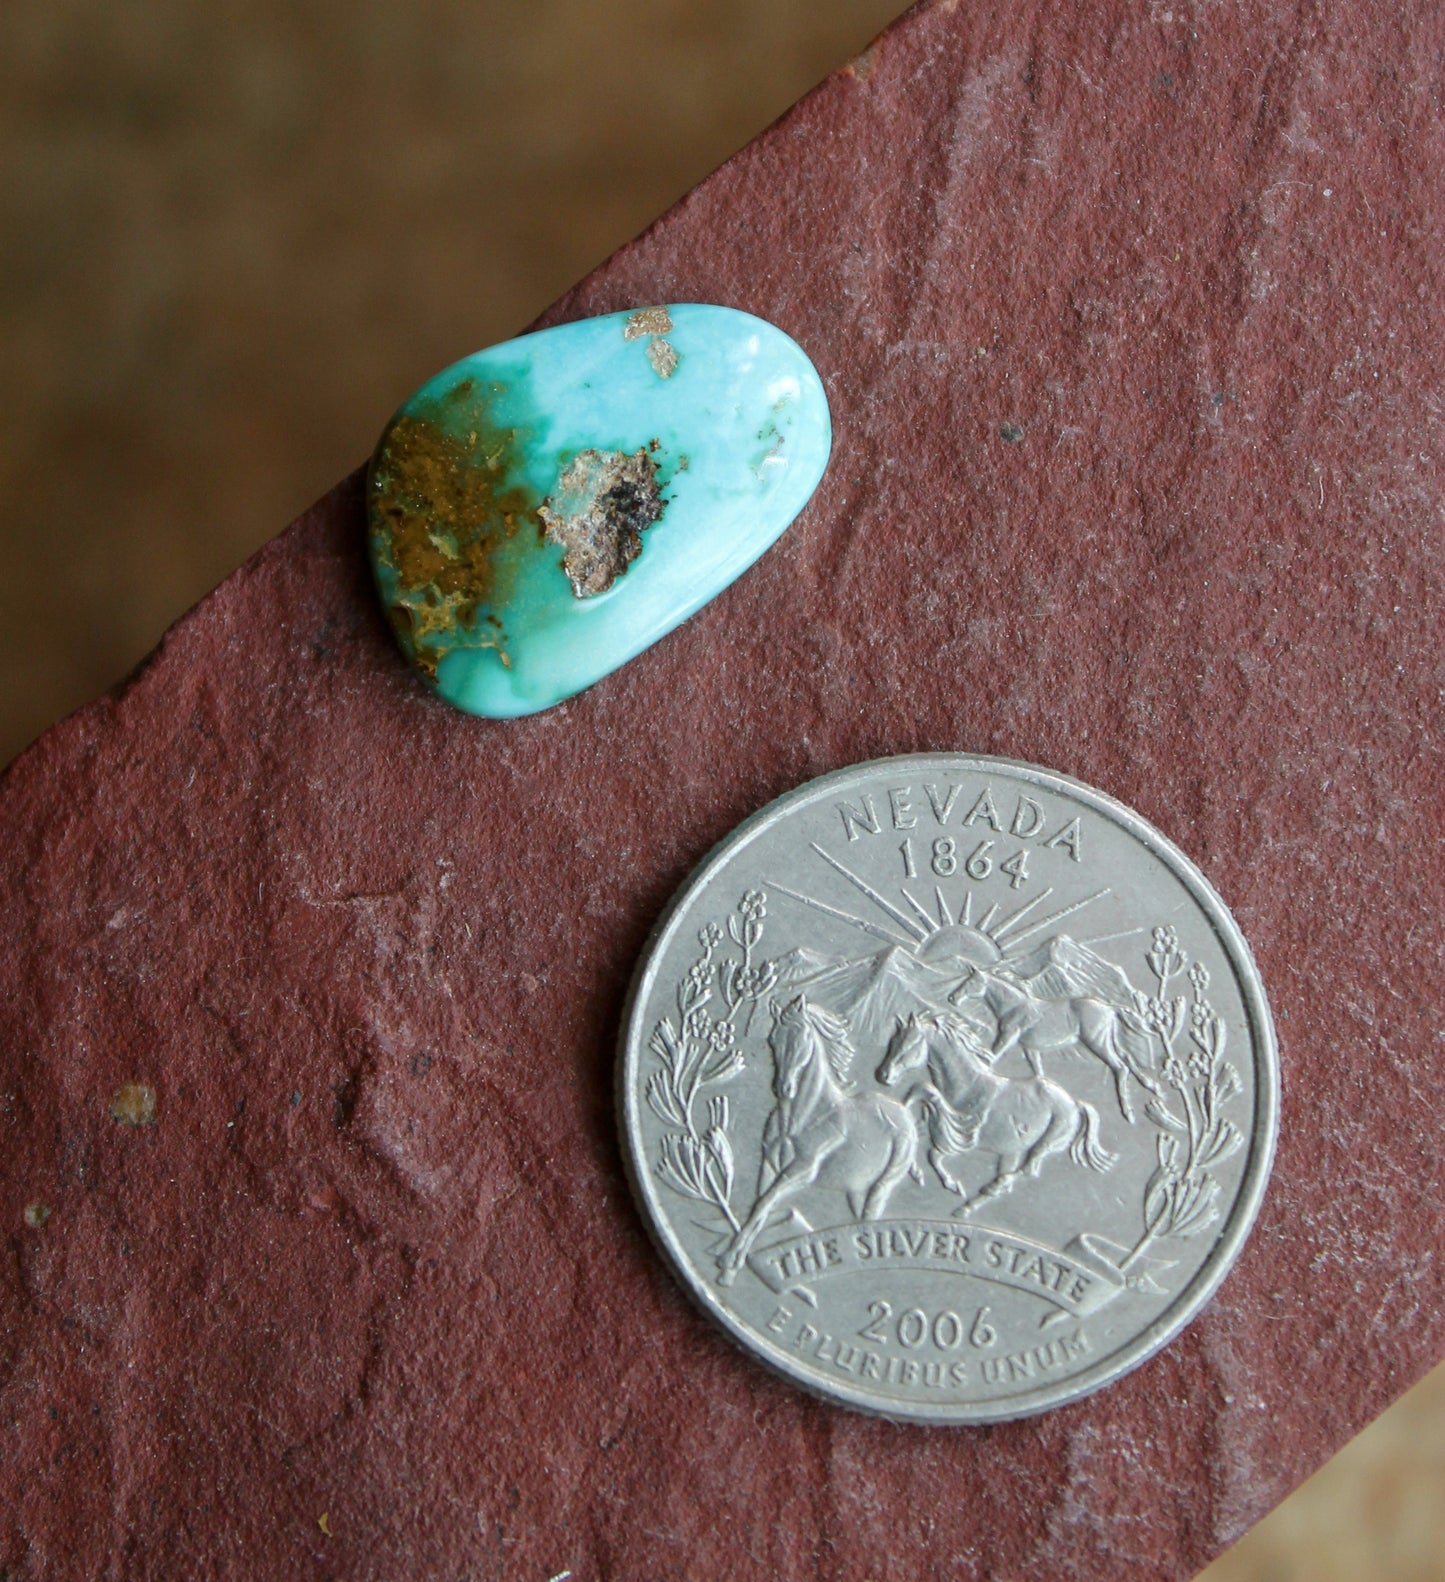 6 carat color blue Stone Mountain Turquoise cabochon with red inclusions